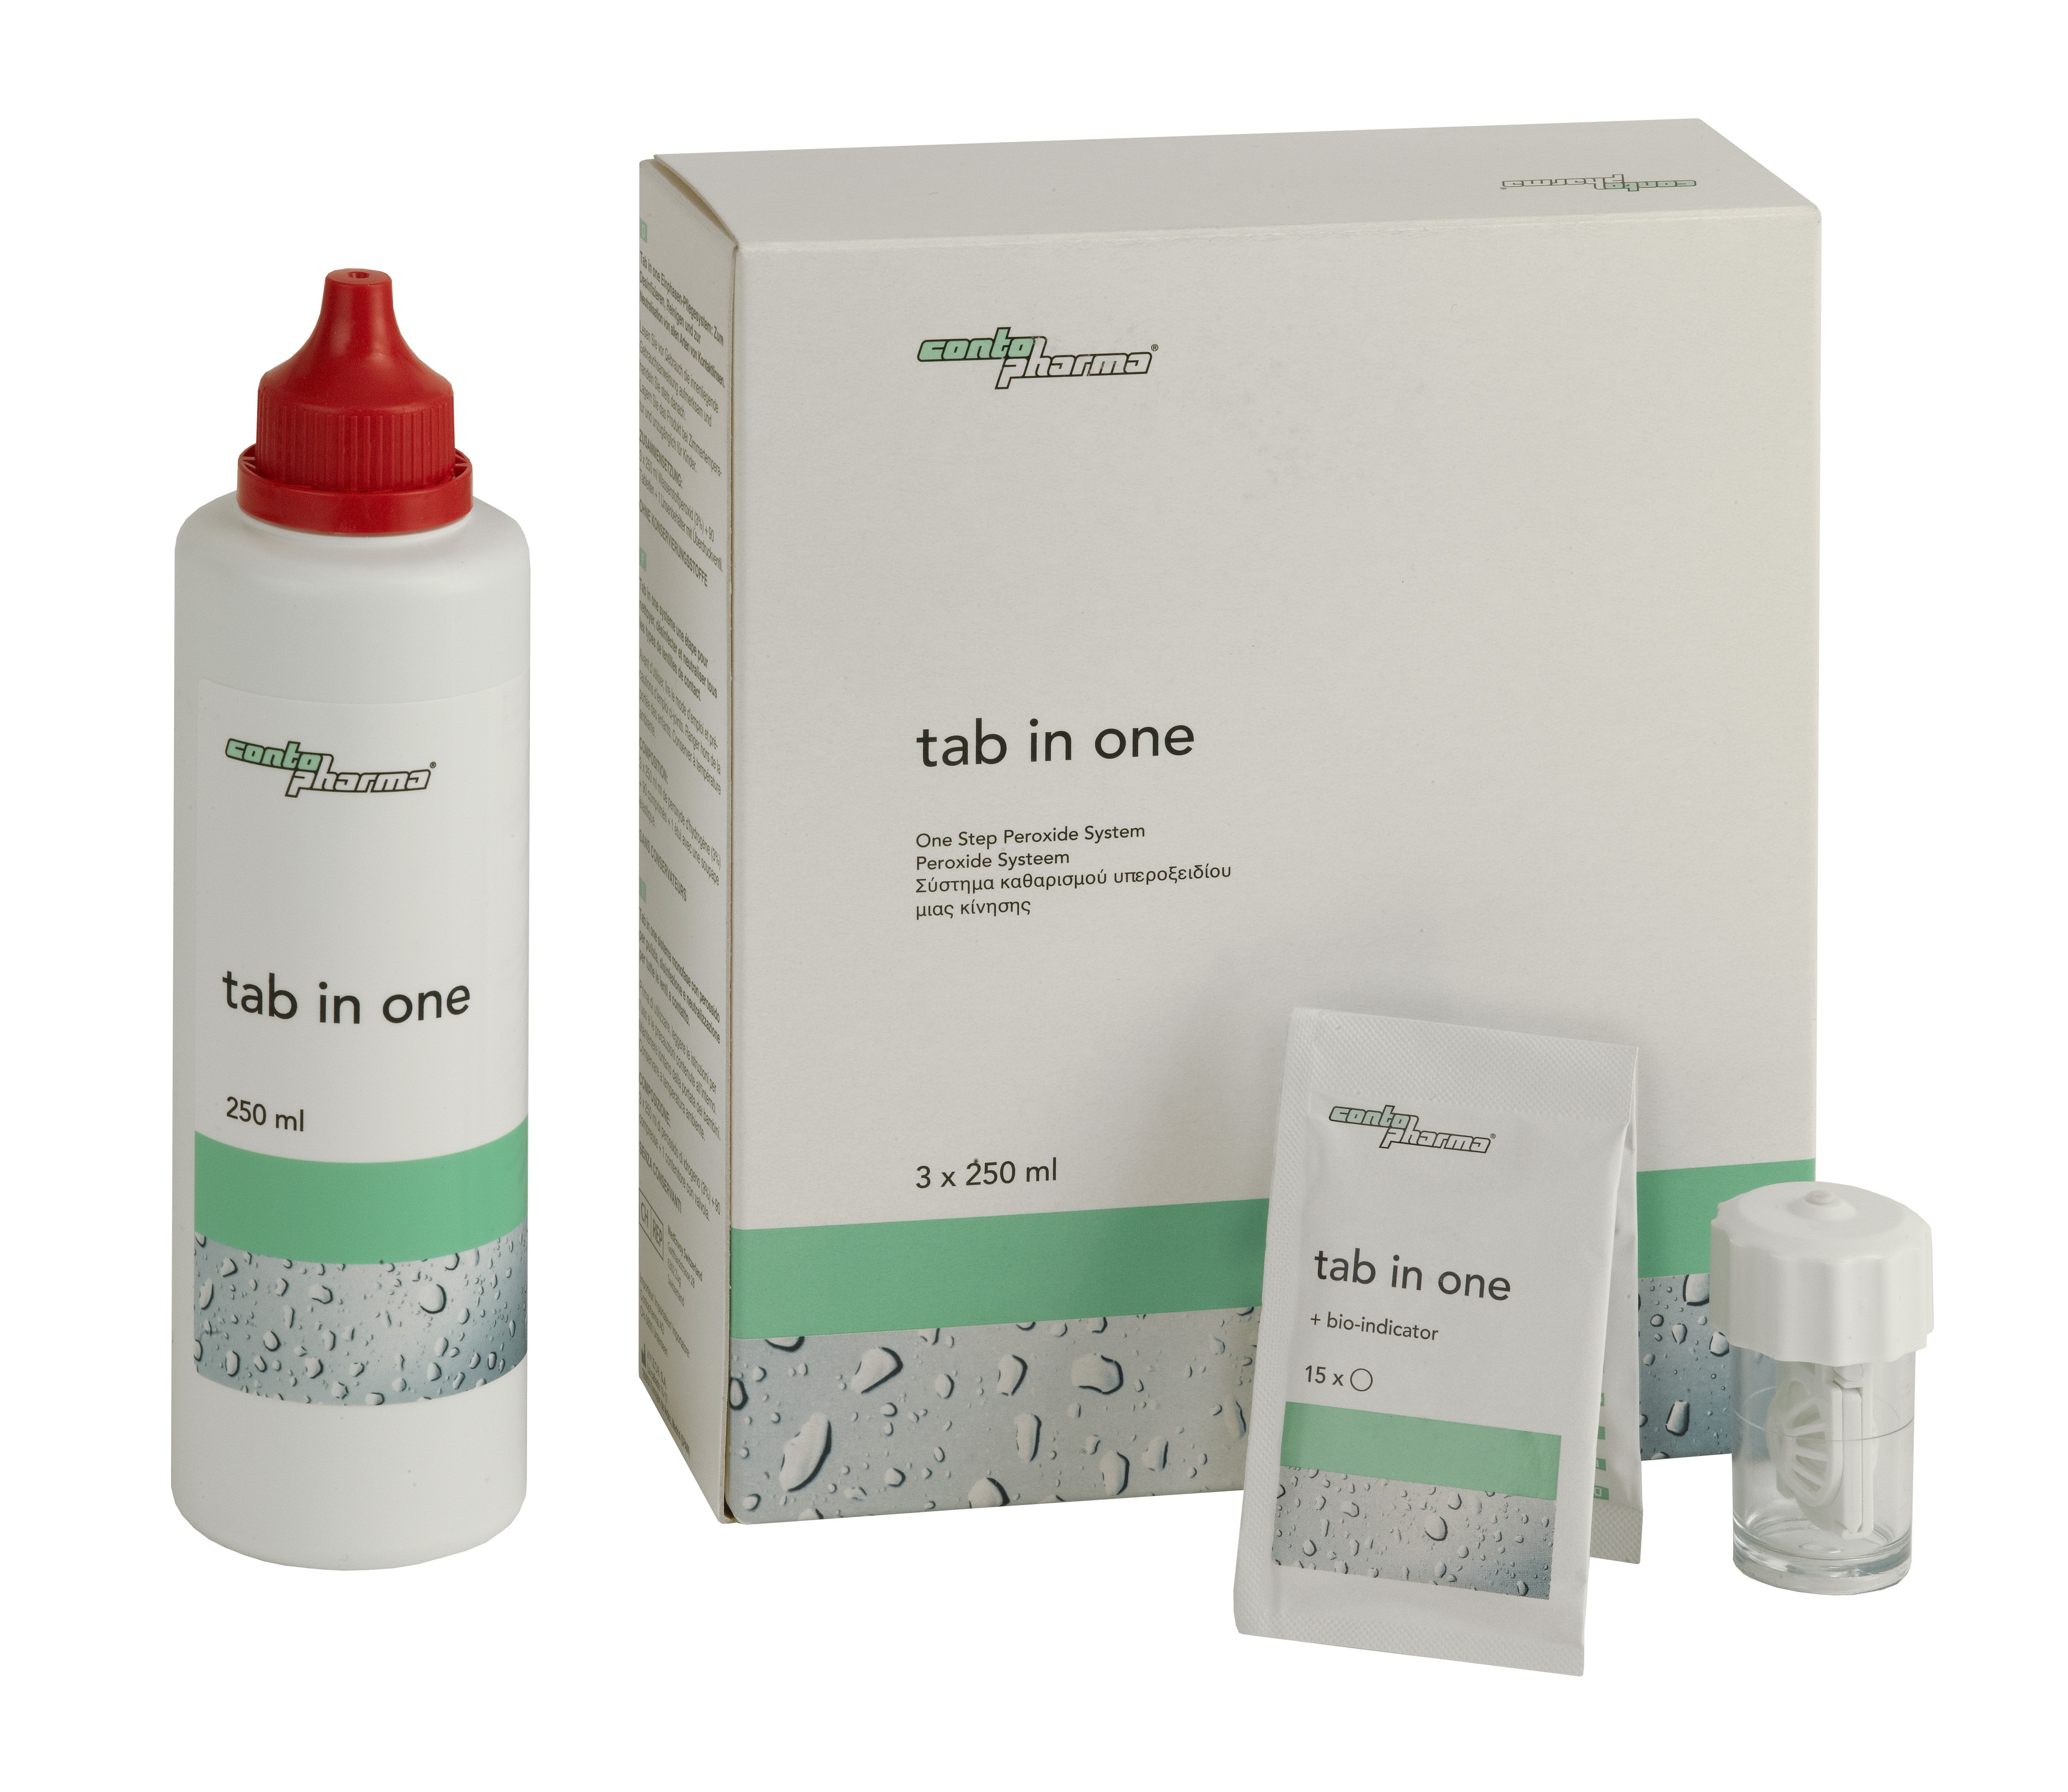 CONTOPHARMA Peroxyd-System "tab in one"